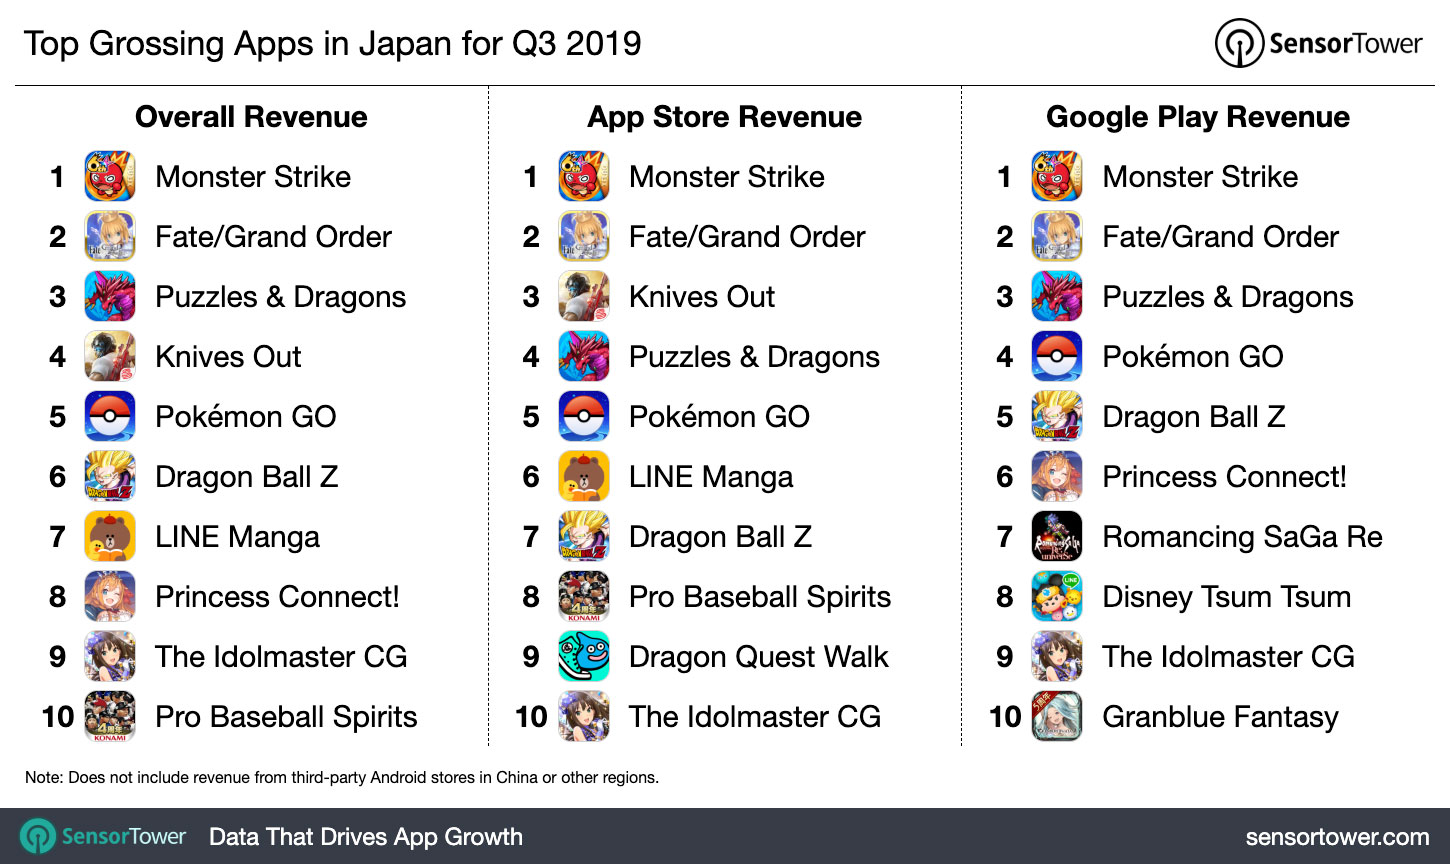 Top Grossing Apps in Japan for Q3 2019